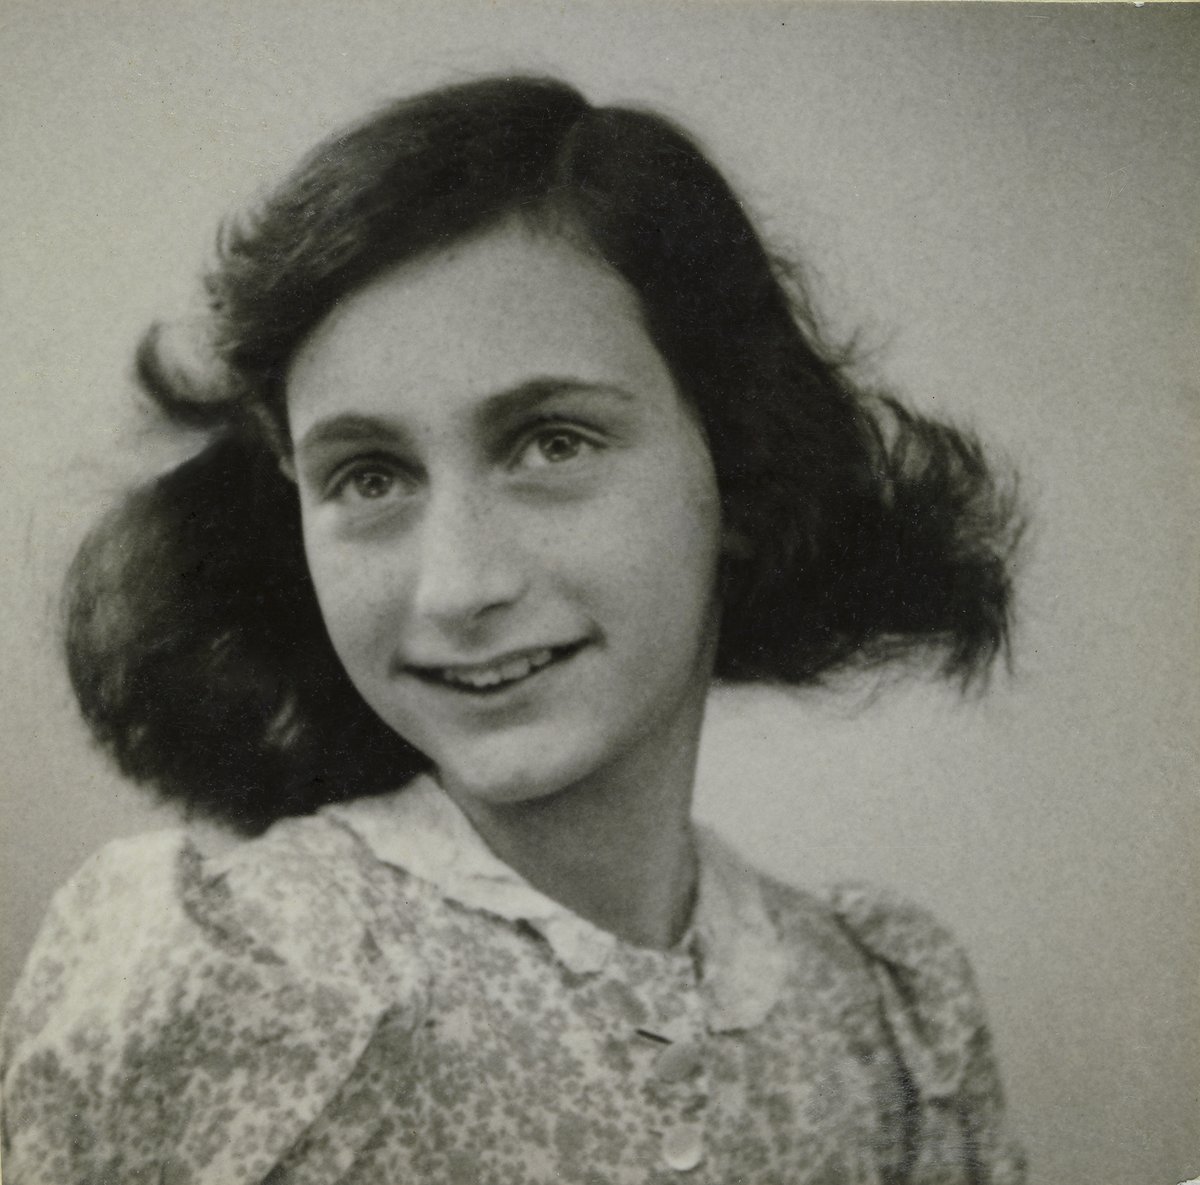 Through Anne Frank’s diary, we felt we knew her. She held grudges; she idolized movie stars. She was just learning to love. Today would have been her 92nd birthday. Photo collection Anne Frank House, Amsterdam encyclopedia.ushmm.org/content/en/art…